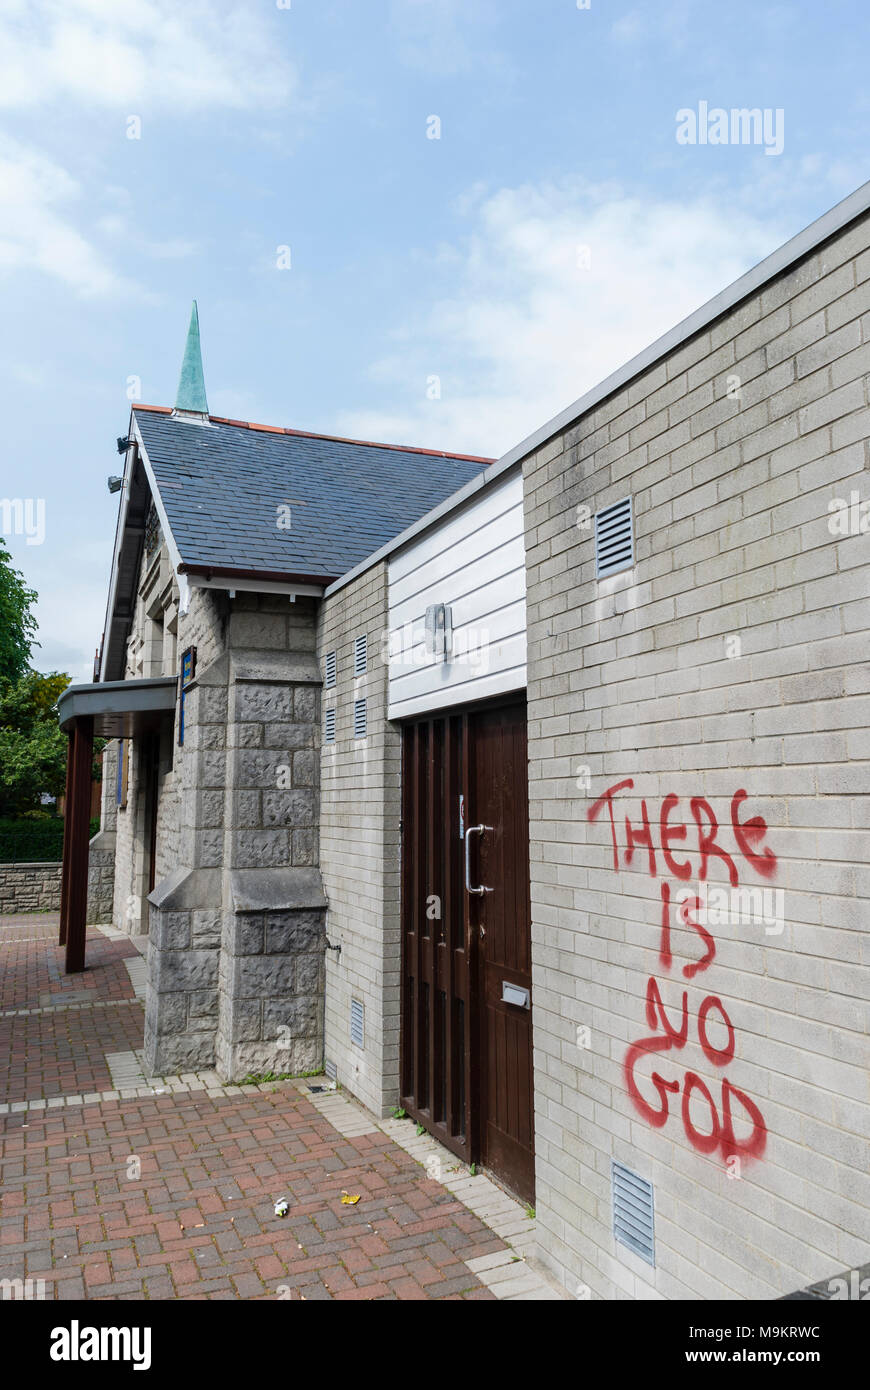 Graffiti on a wall of a church saying 'There Is No God' Stock Photo